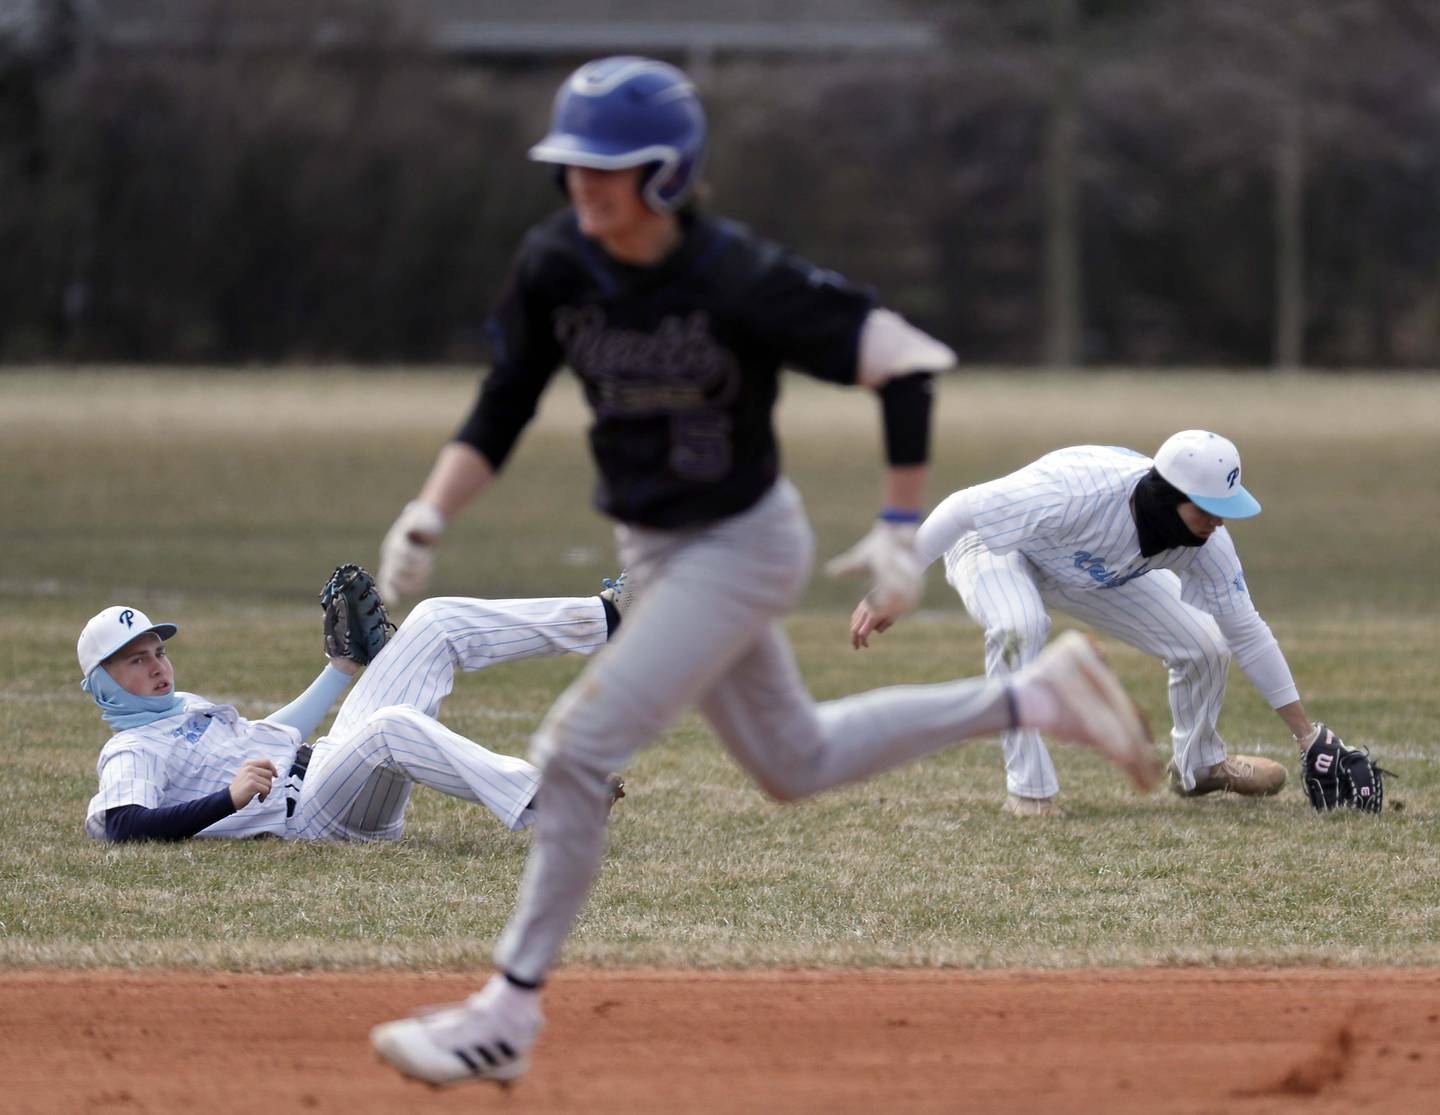 Prospect's Jack Friar (11) and Gavin Flanagan (9) pick up a shot by St. Charles North's Jaden Harmon (5) as he rounds first base and heads to second Tuesday March 28, 2023 in Mt. Prospect.